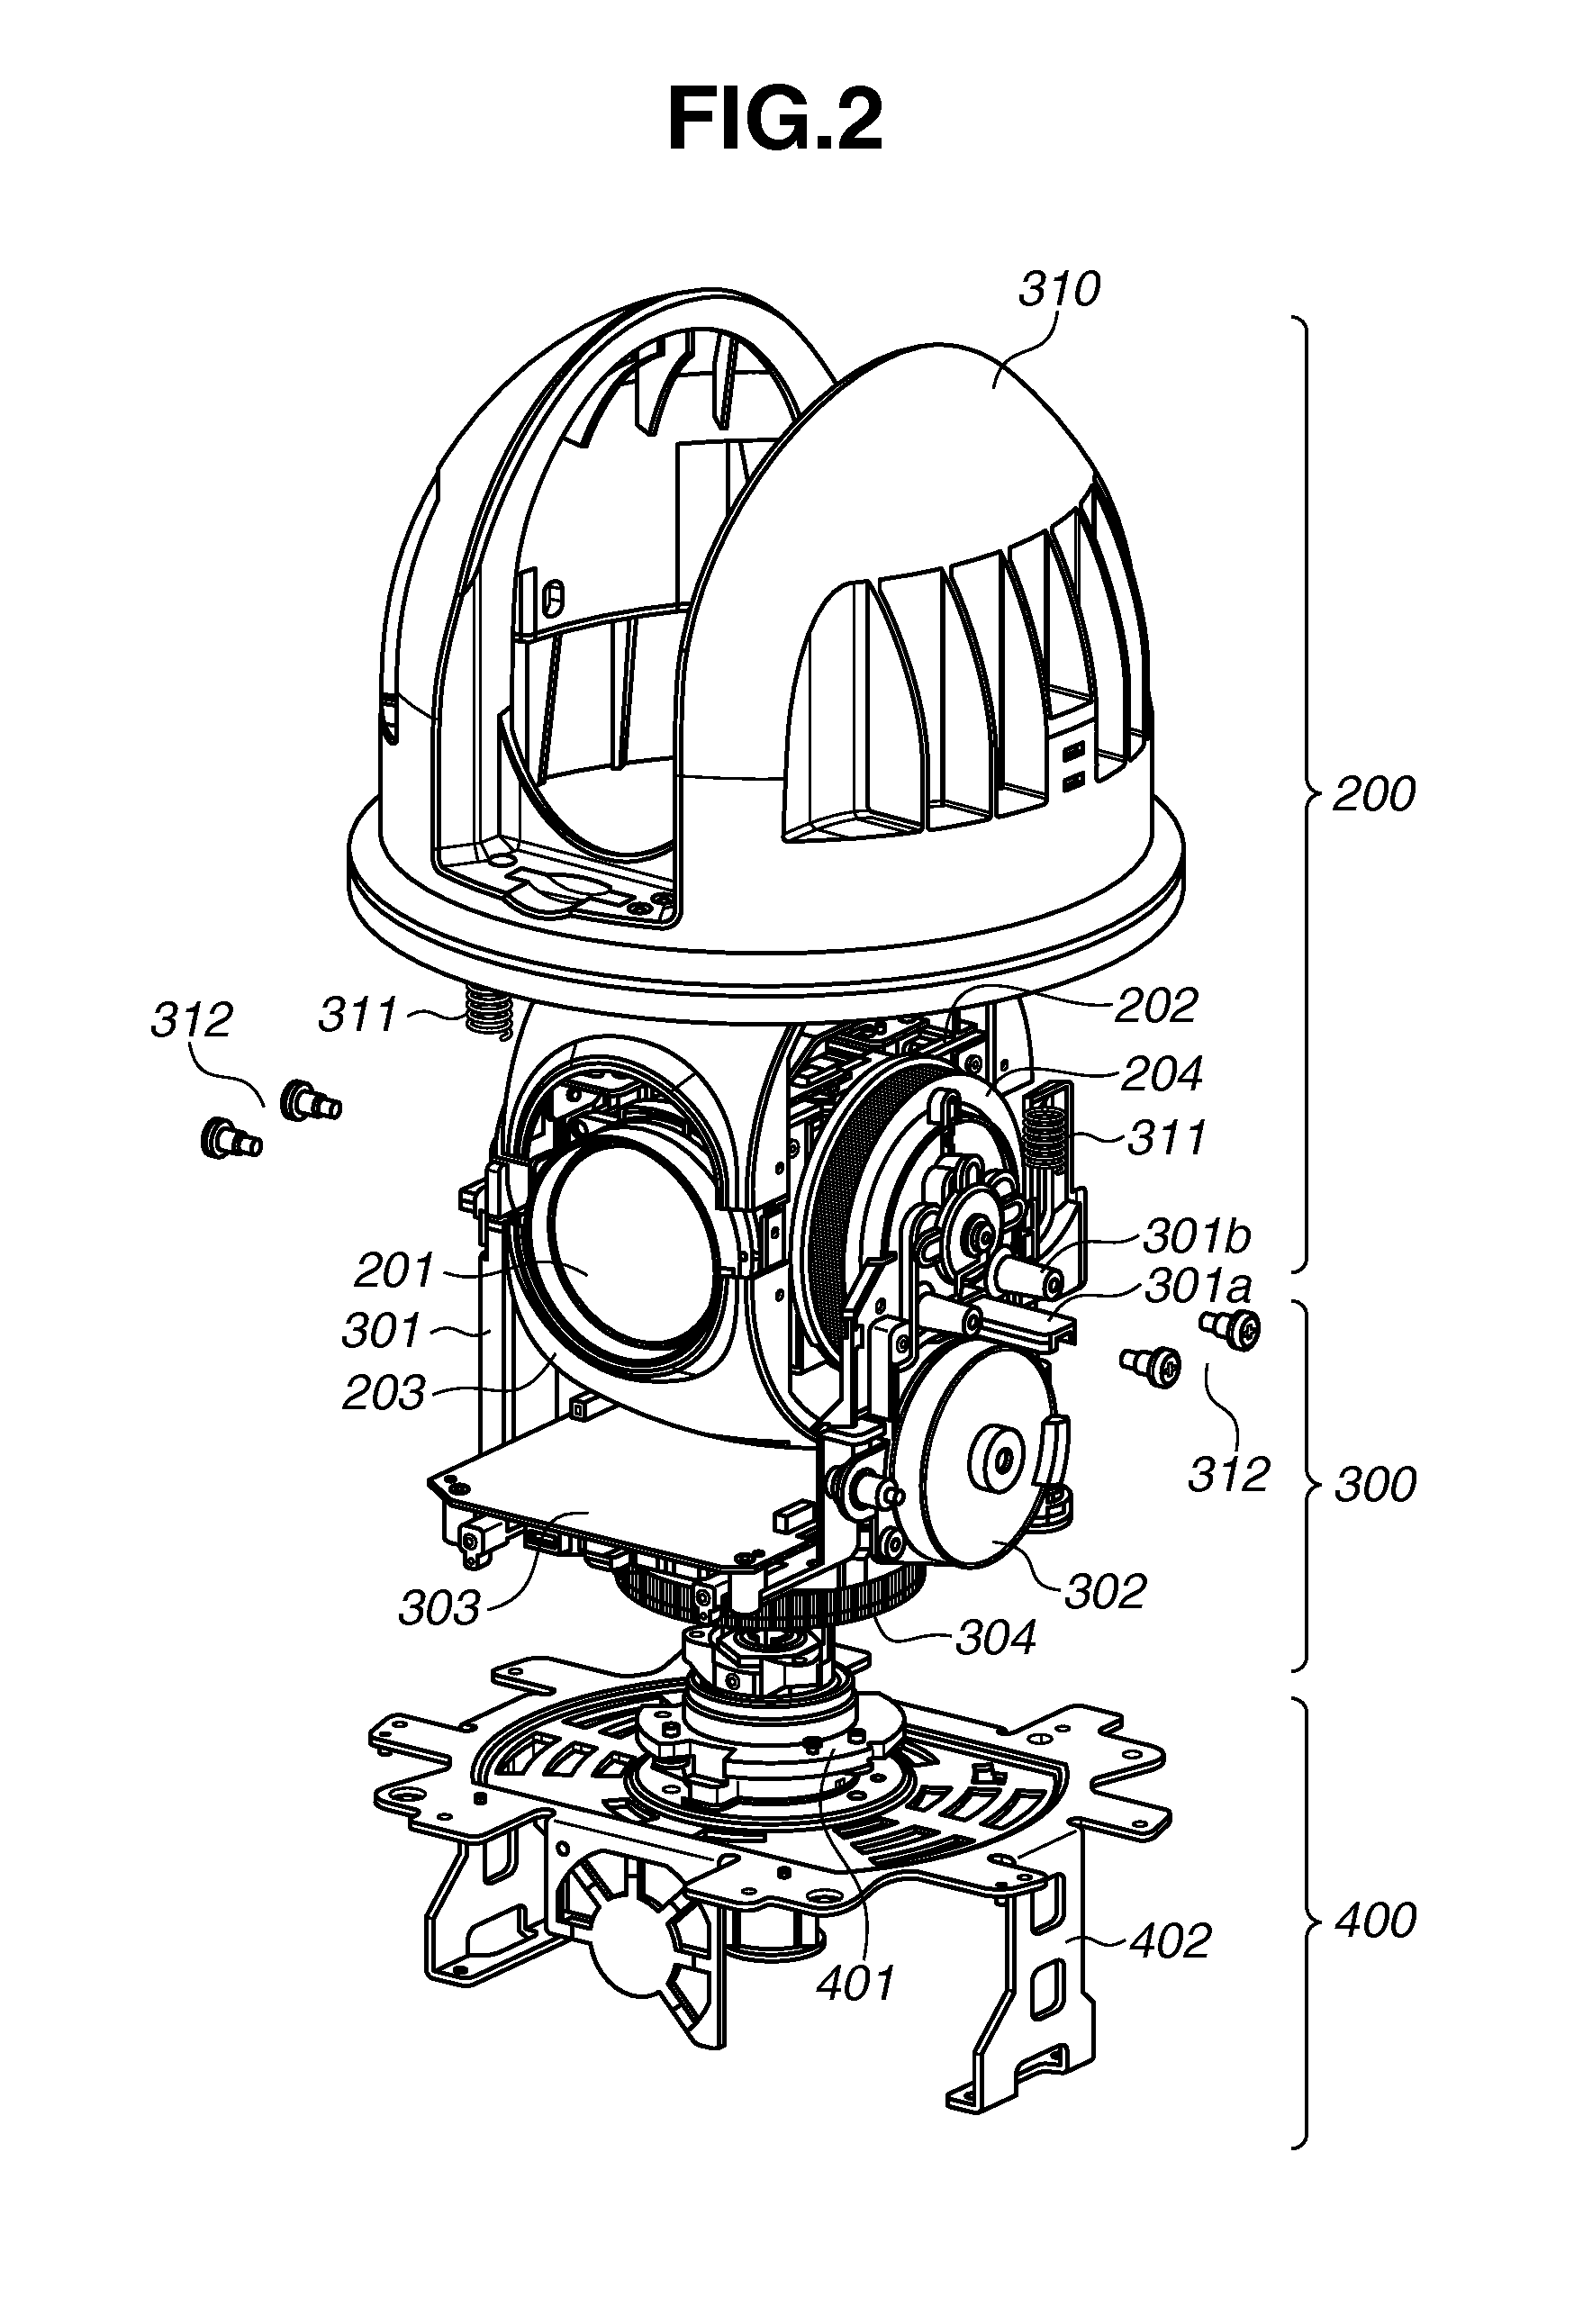 Image pickup apparatus with shock resistance